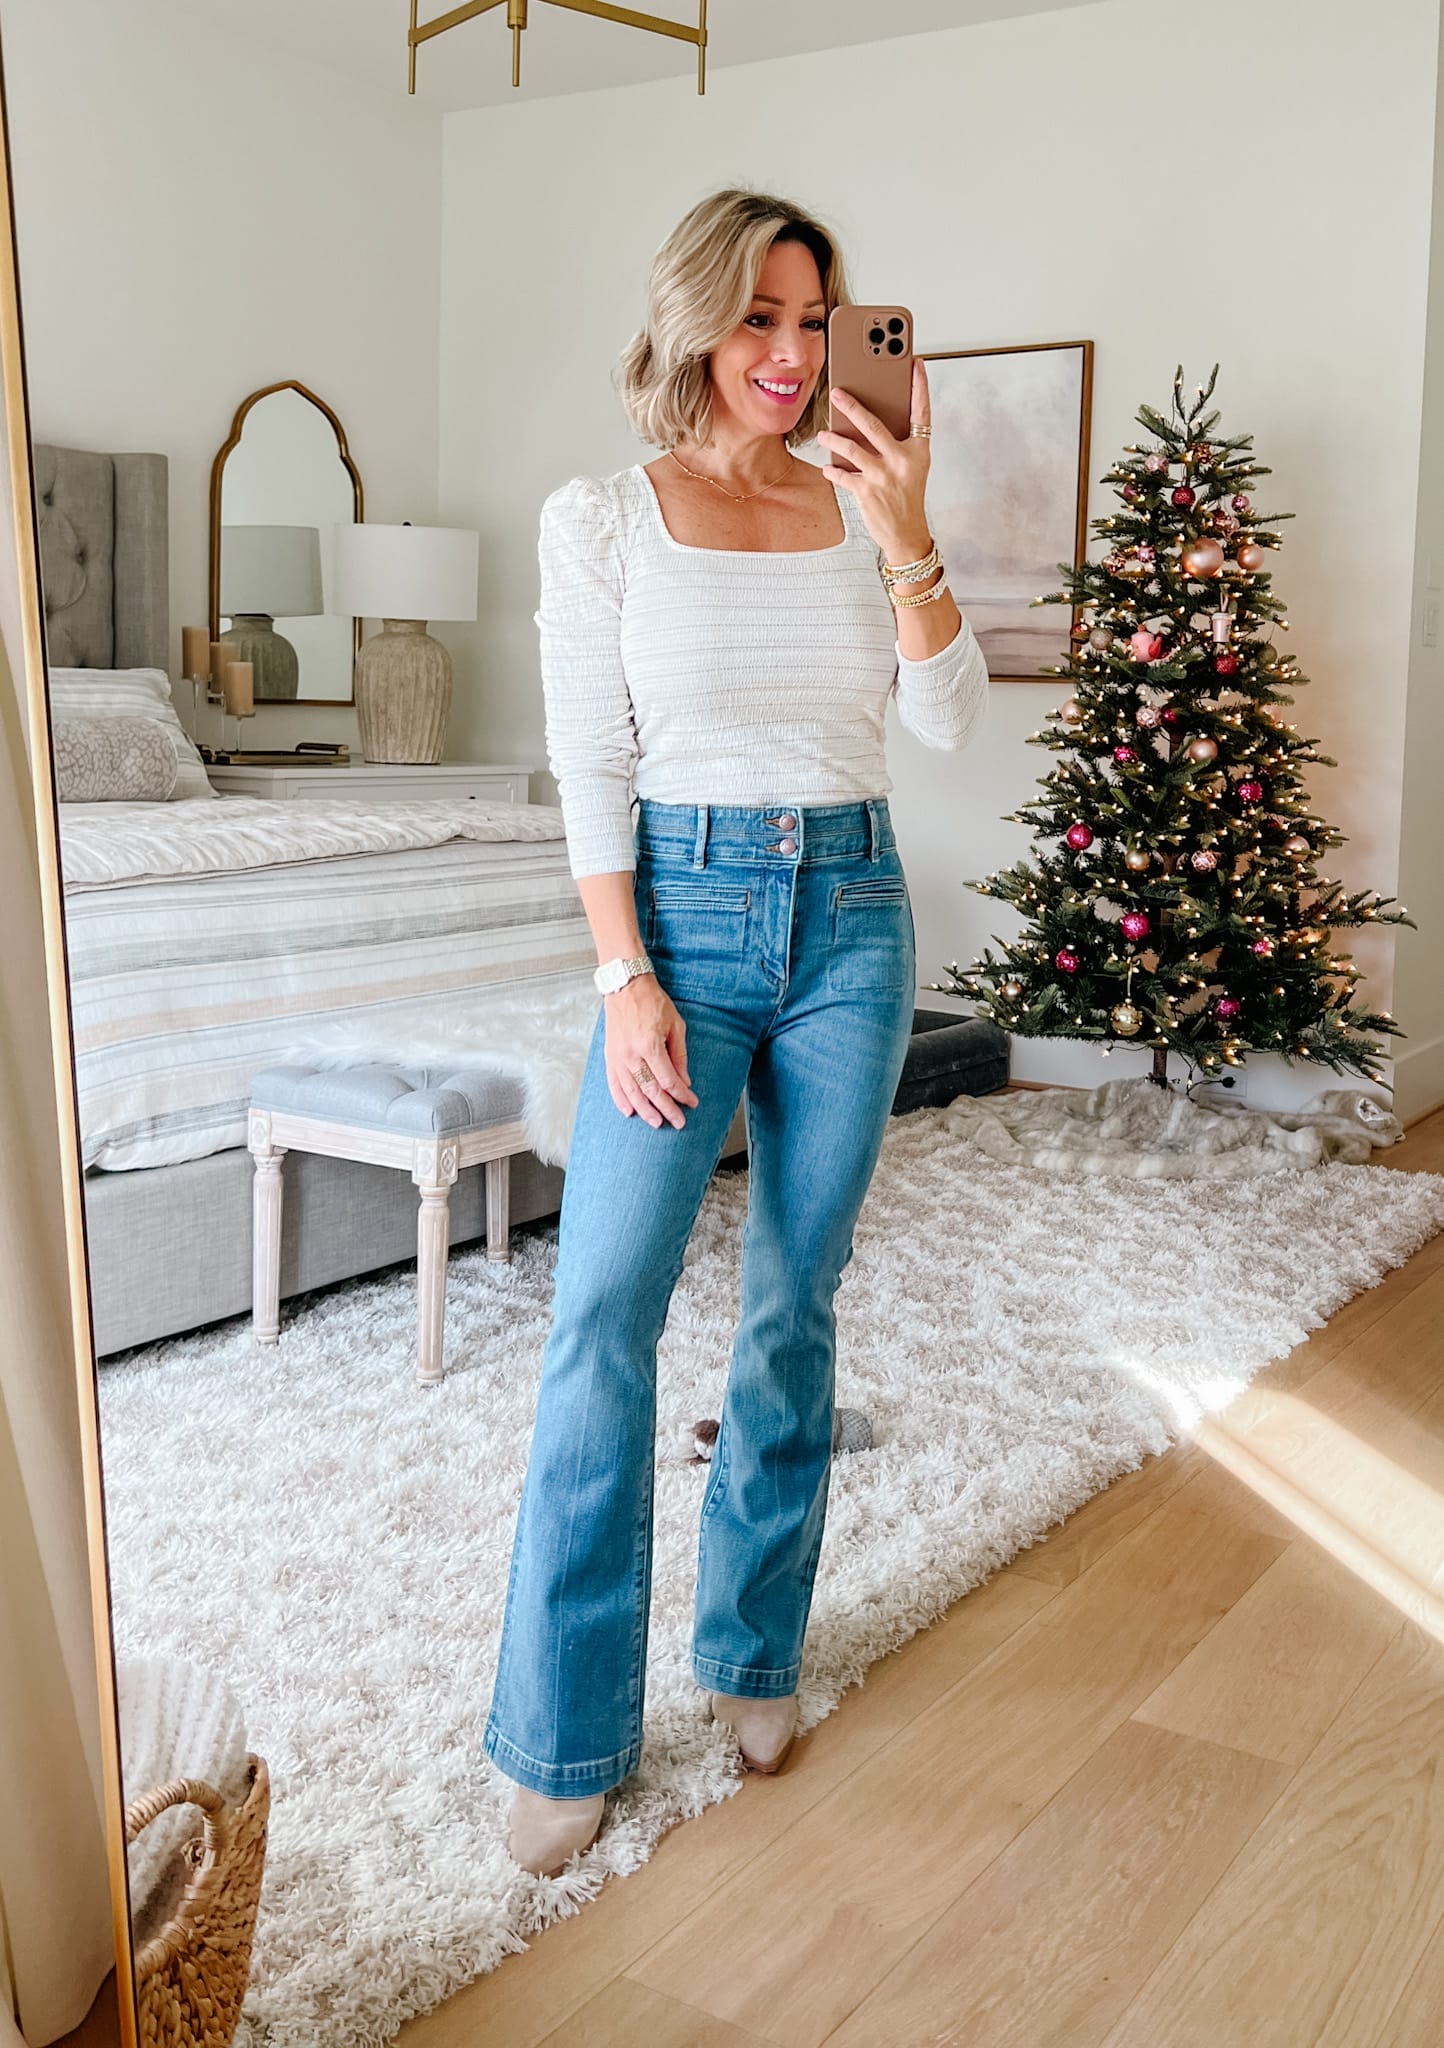 Crazy for these Jeans & Winter Outfits